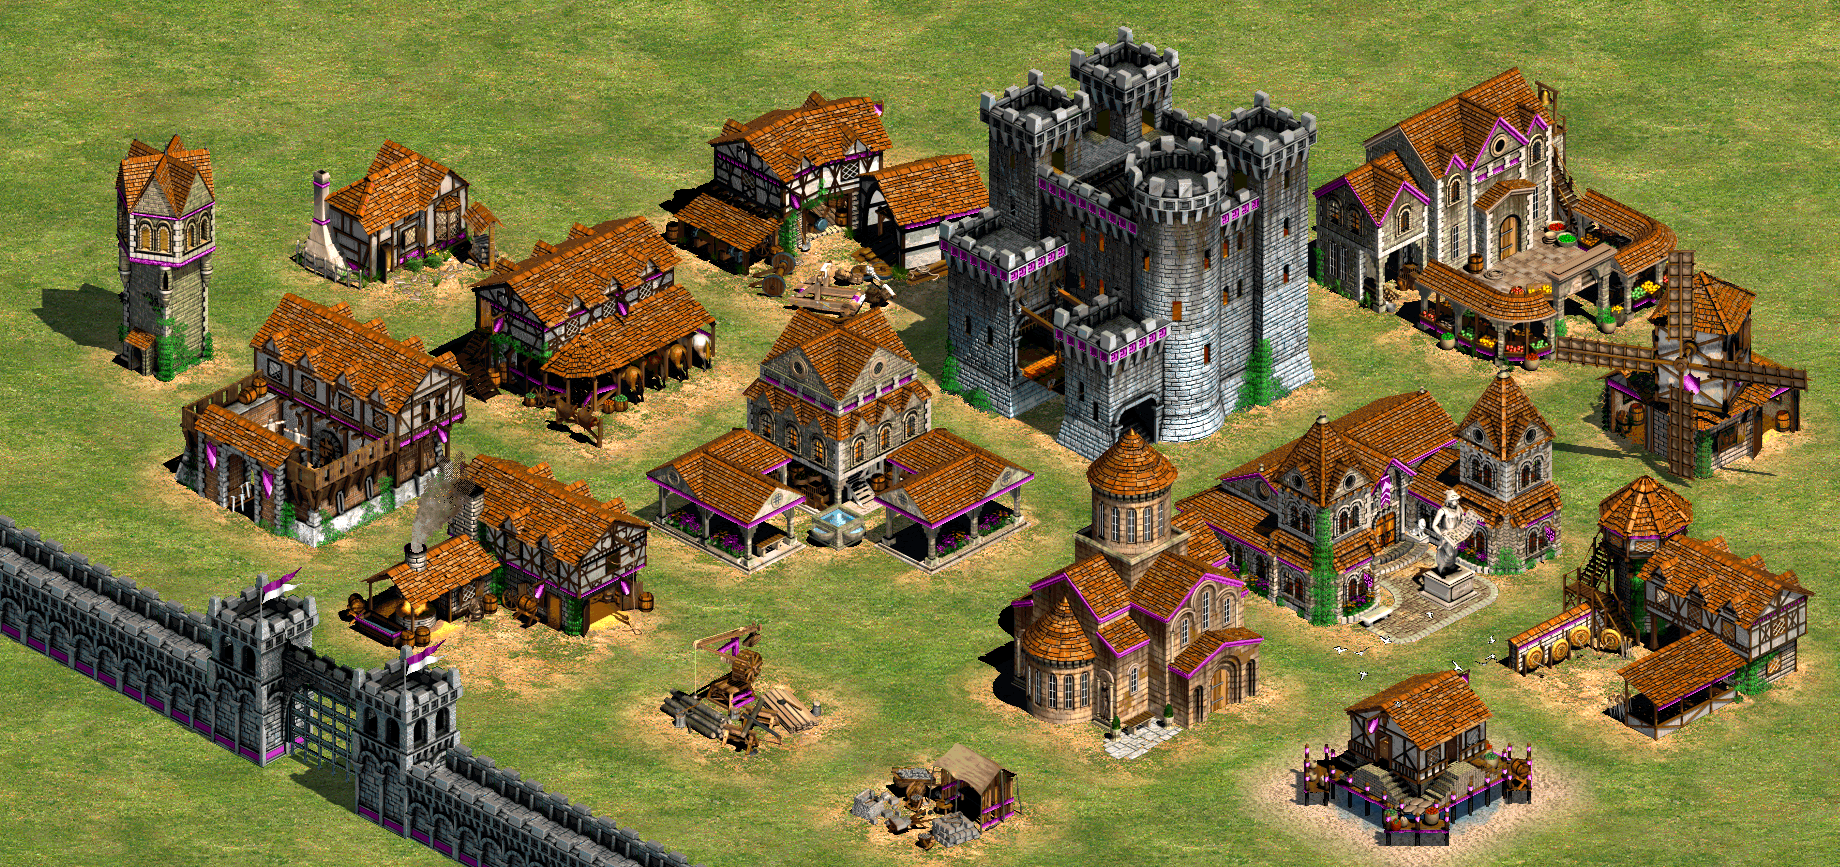 age of empires 2 build order huns